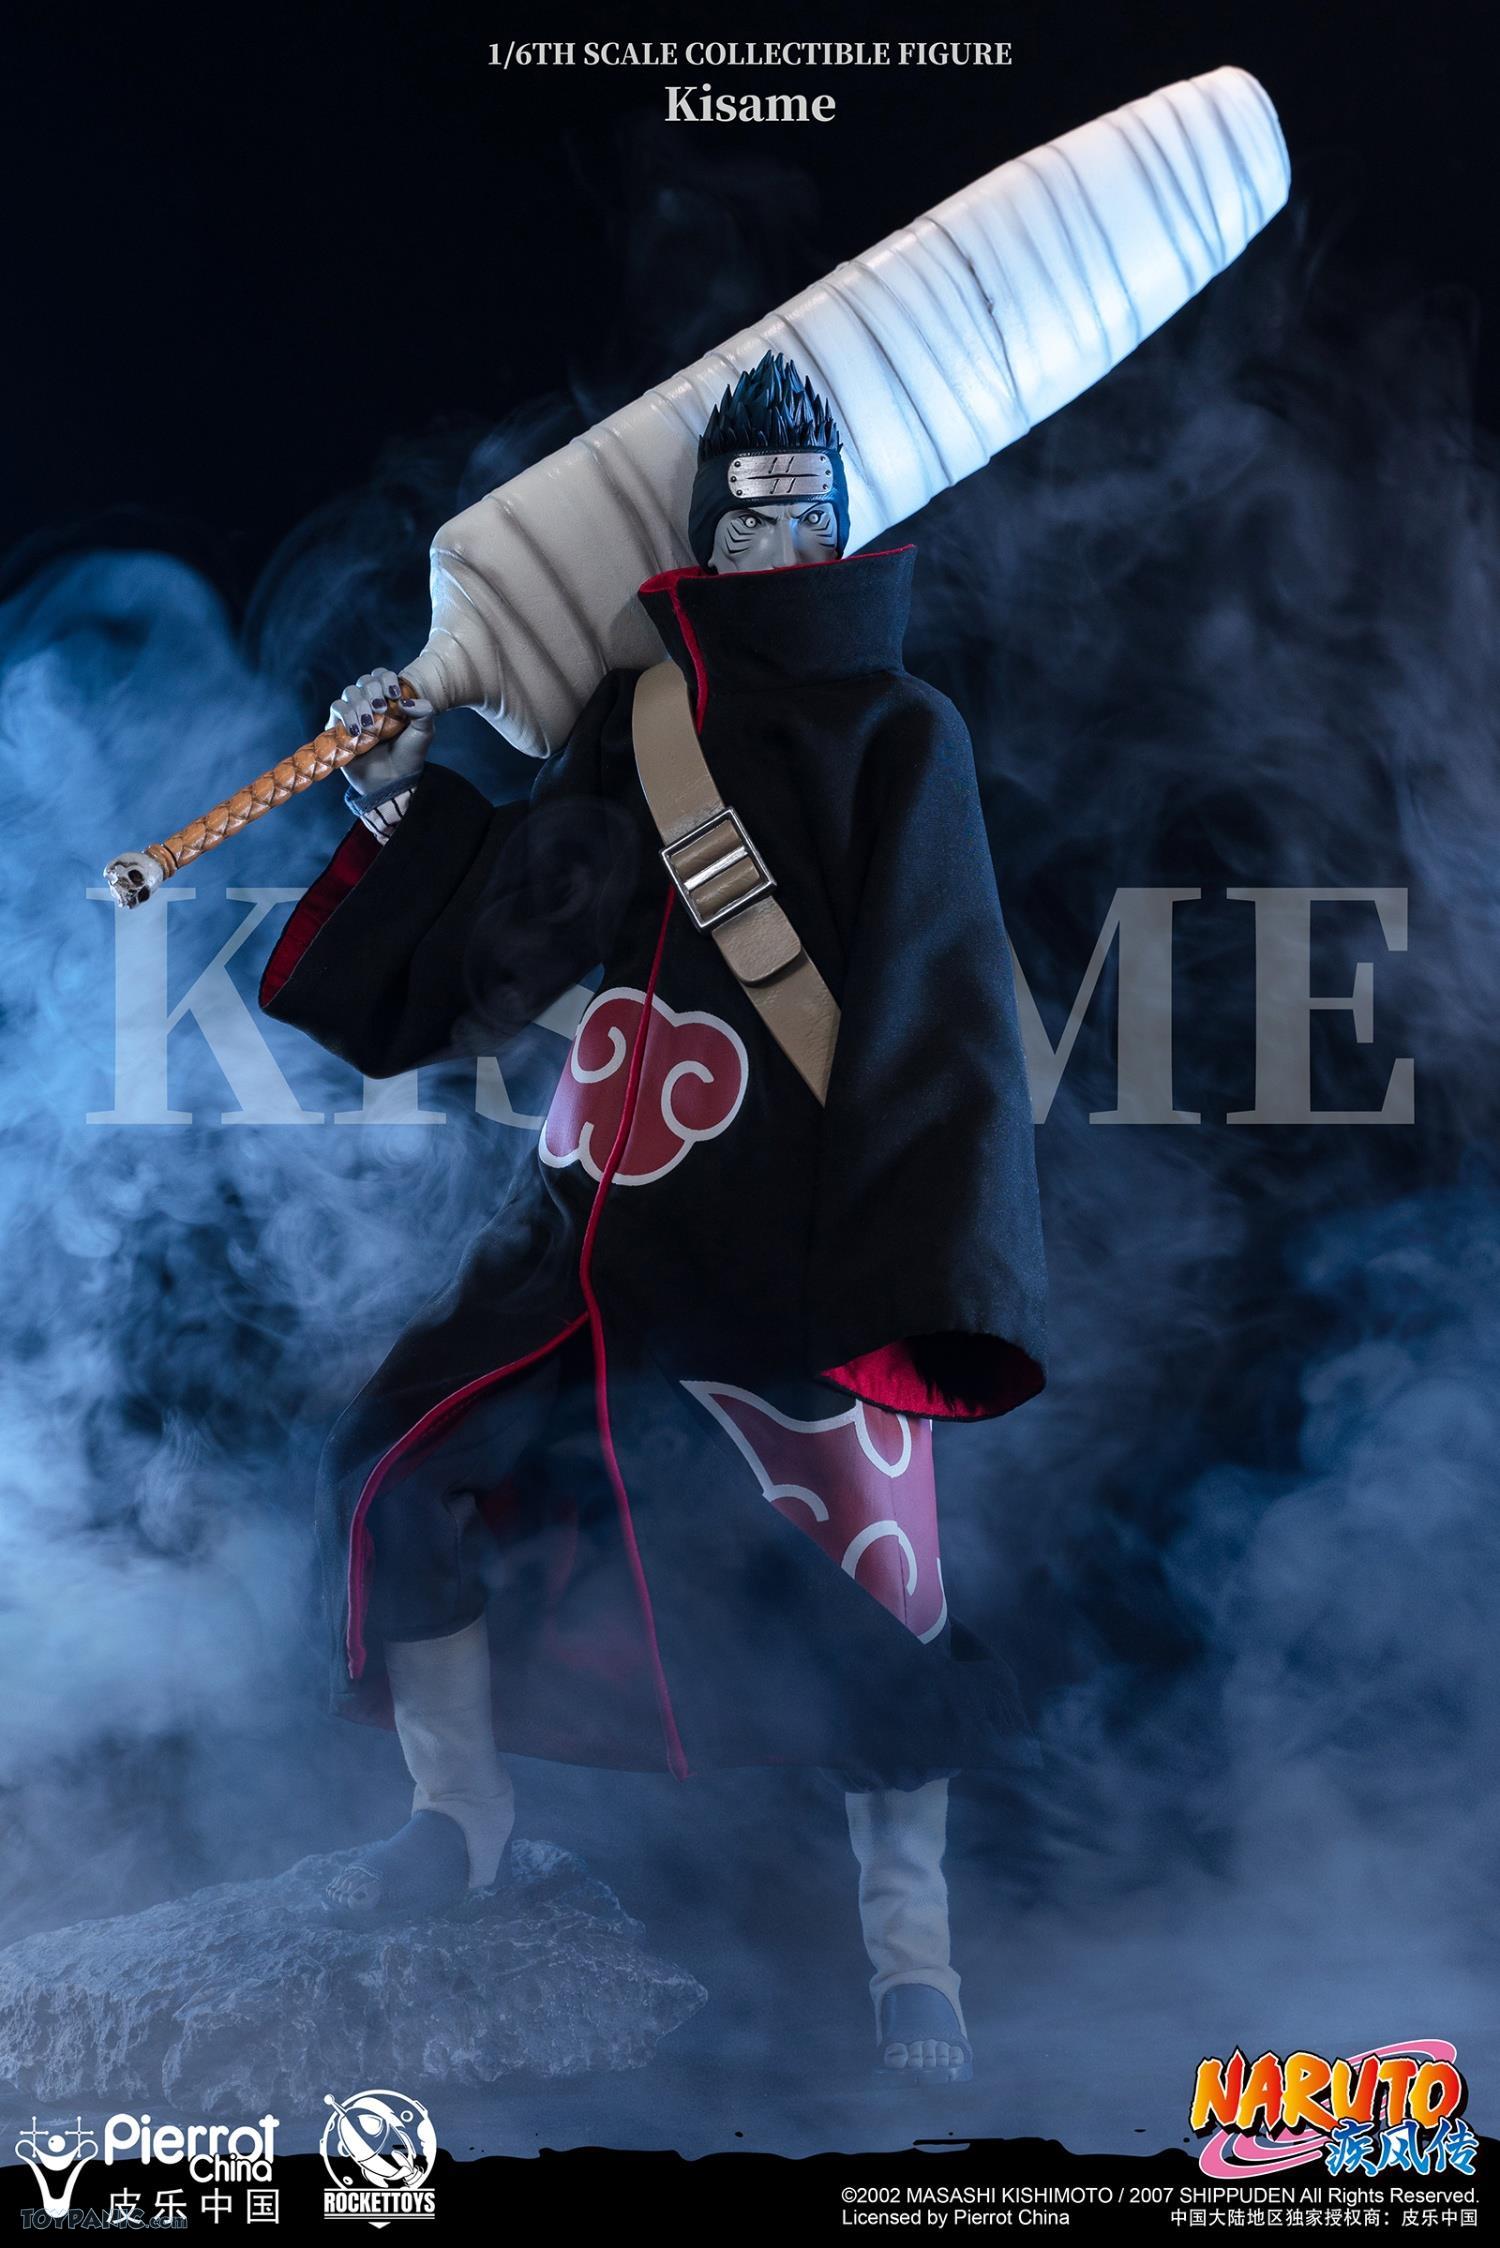 NEW PRODUCT: Rocket Toys ROC-007 1/6 Scale Kisame 221202460433PM_5828364